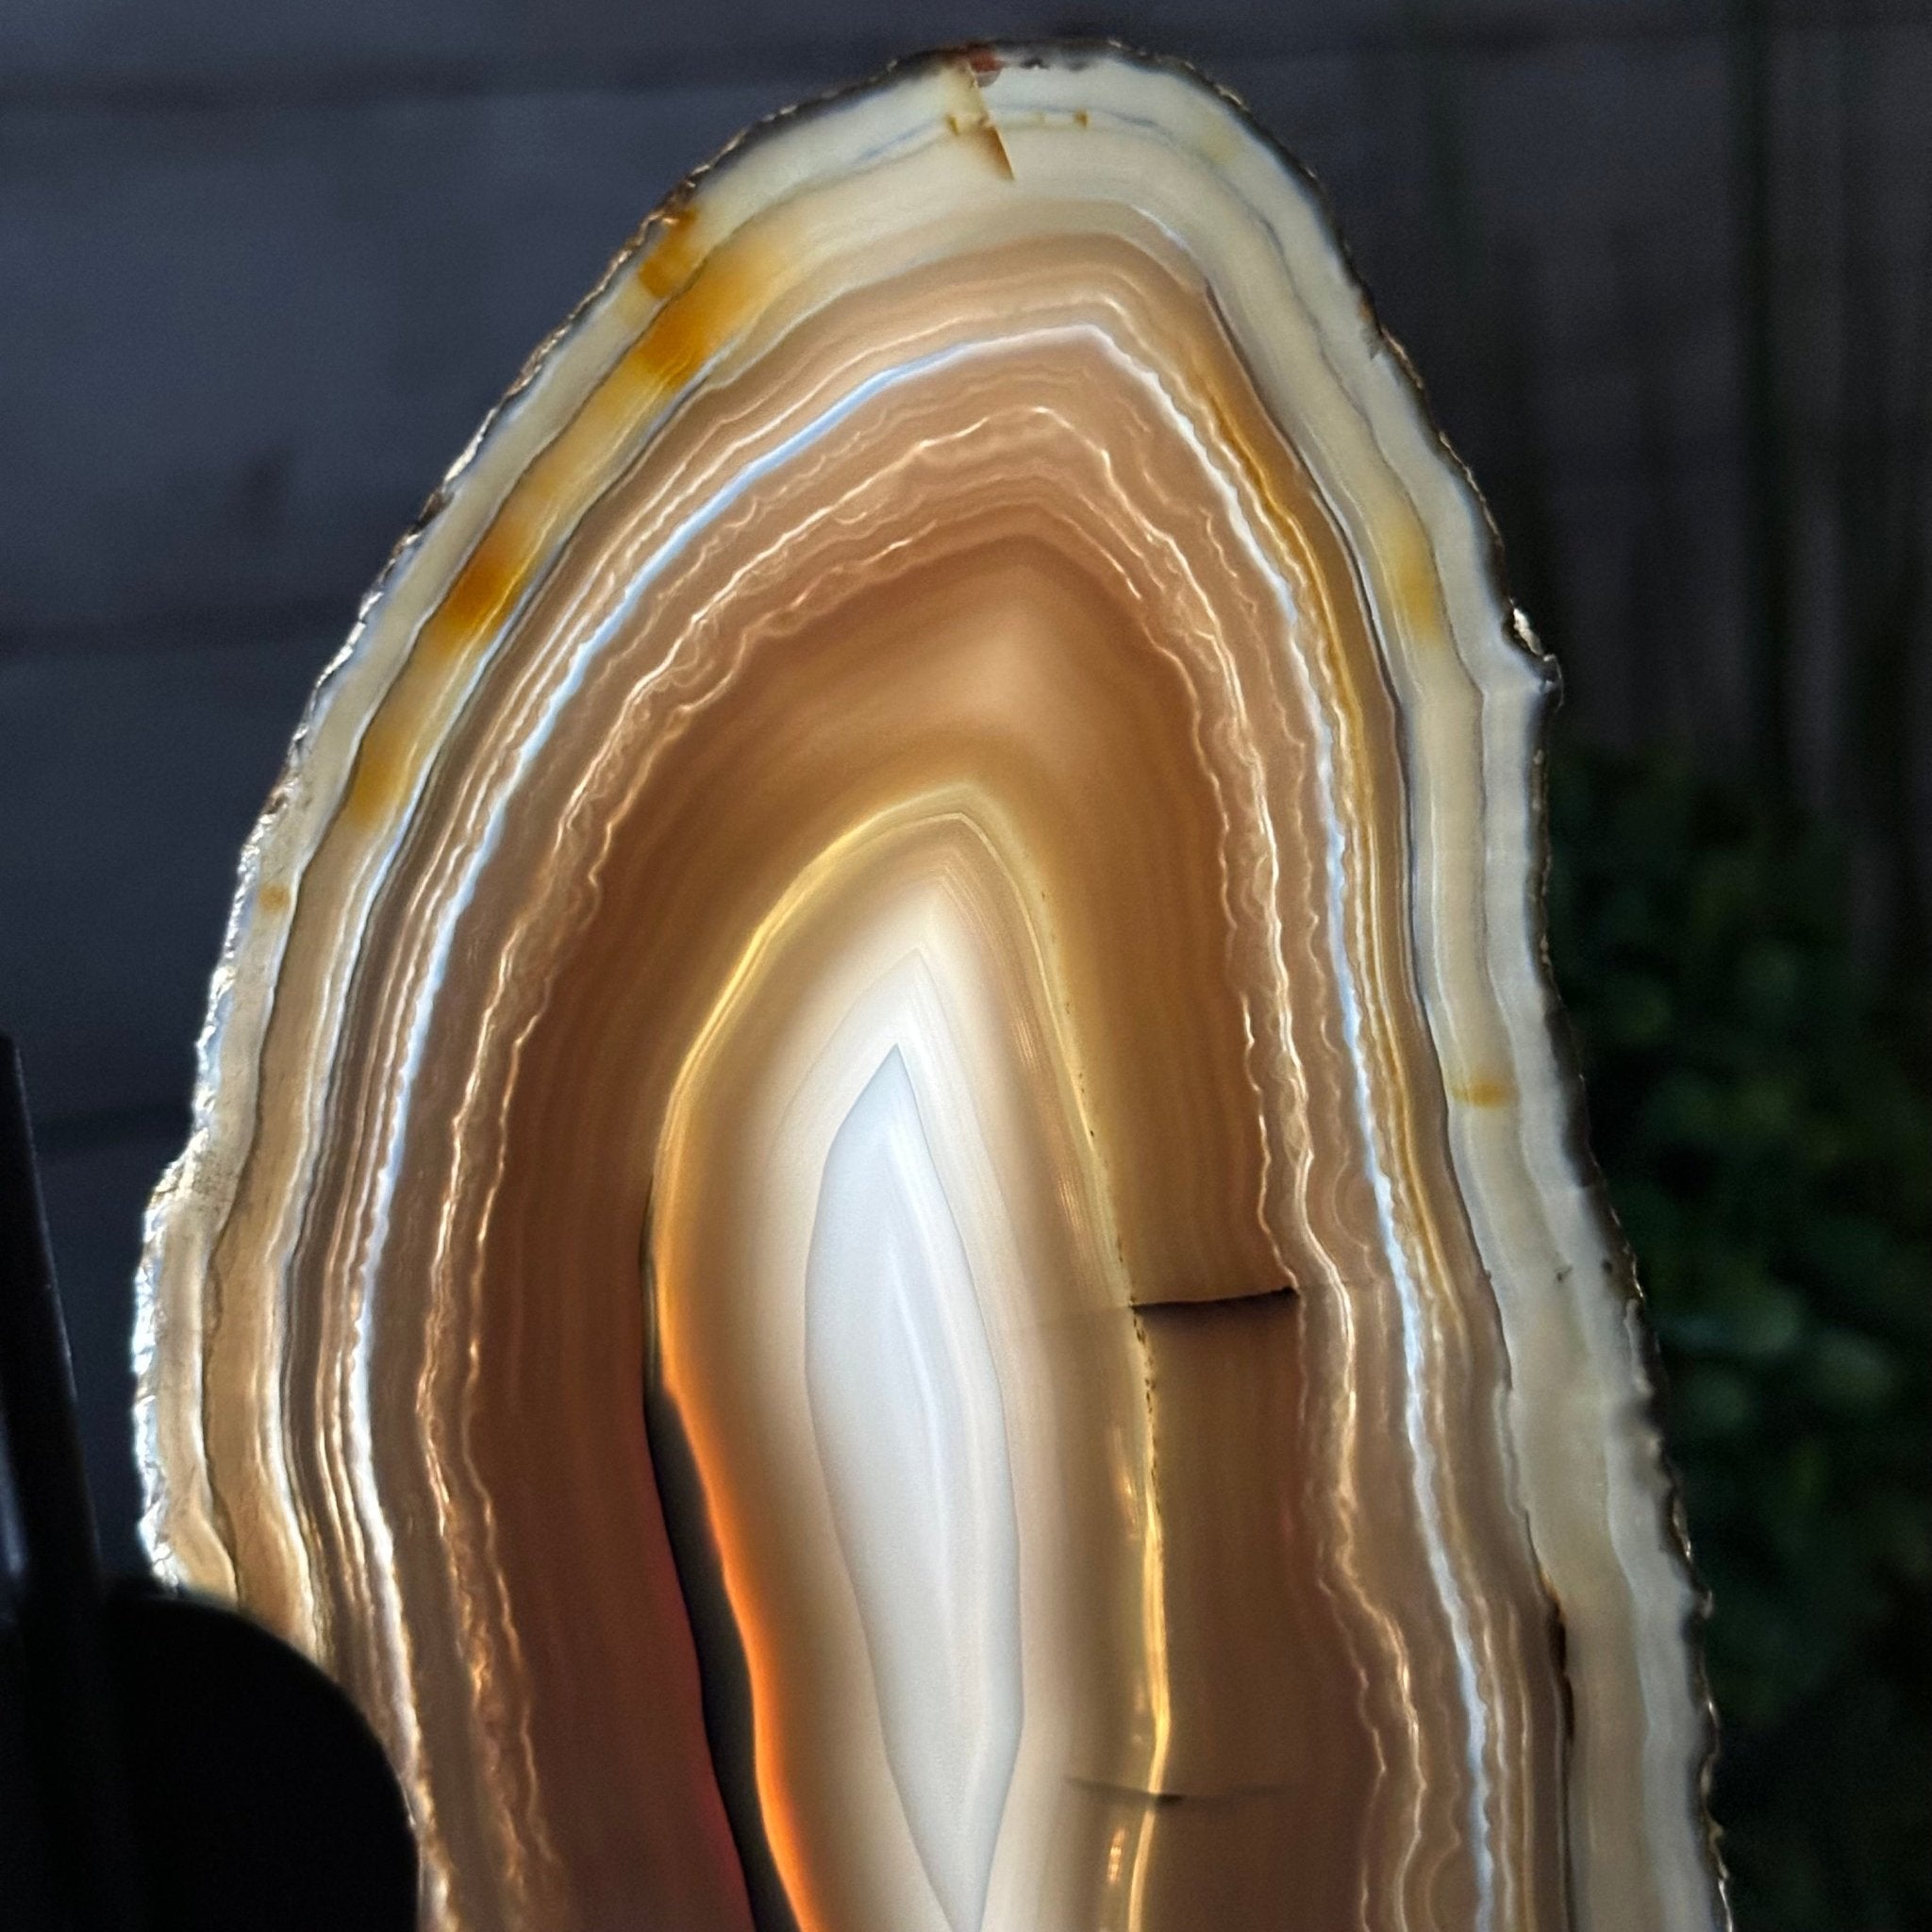 Natural Brazilian Agate "Butterfly Wings", 9.2" Tall #5050NA-106 - Brazil GemsBrazil GemsNatural Brazilian Agate "Butterfly Wings", 9.2" Tall #5050NA-106Agate Butterfly Wings5050NA-106